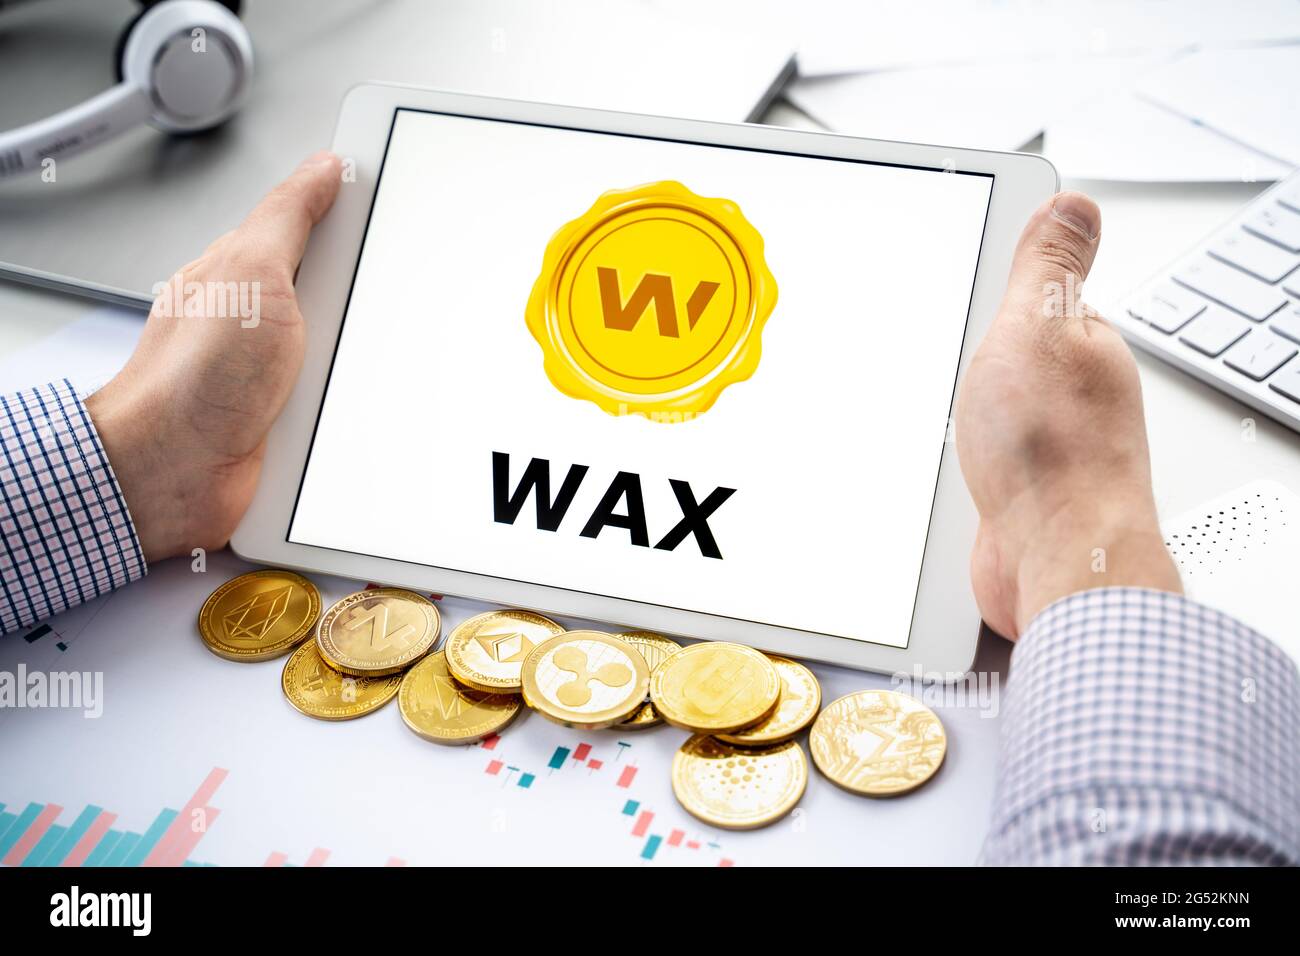 WAXP Coin Price Prediction 2021? Why Is The Price Of WAXP Rising in Last 24 Hours?